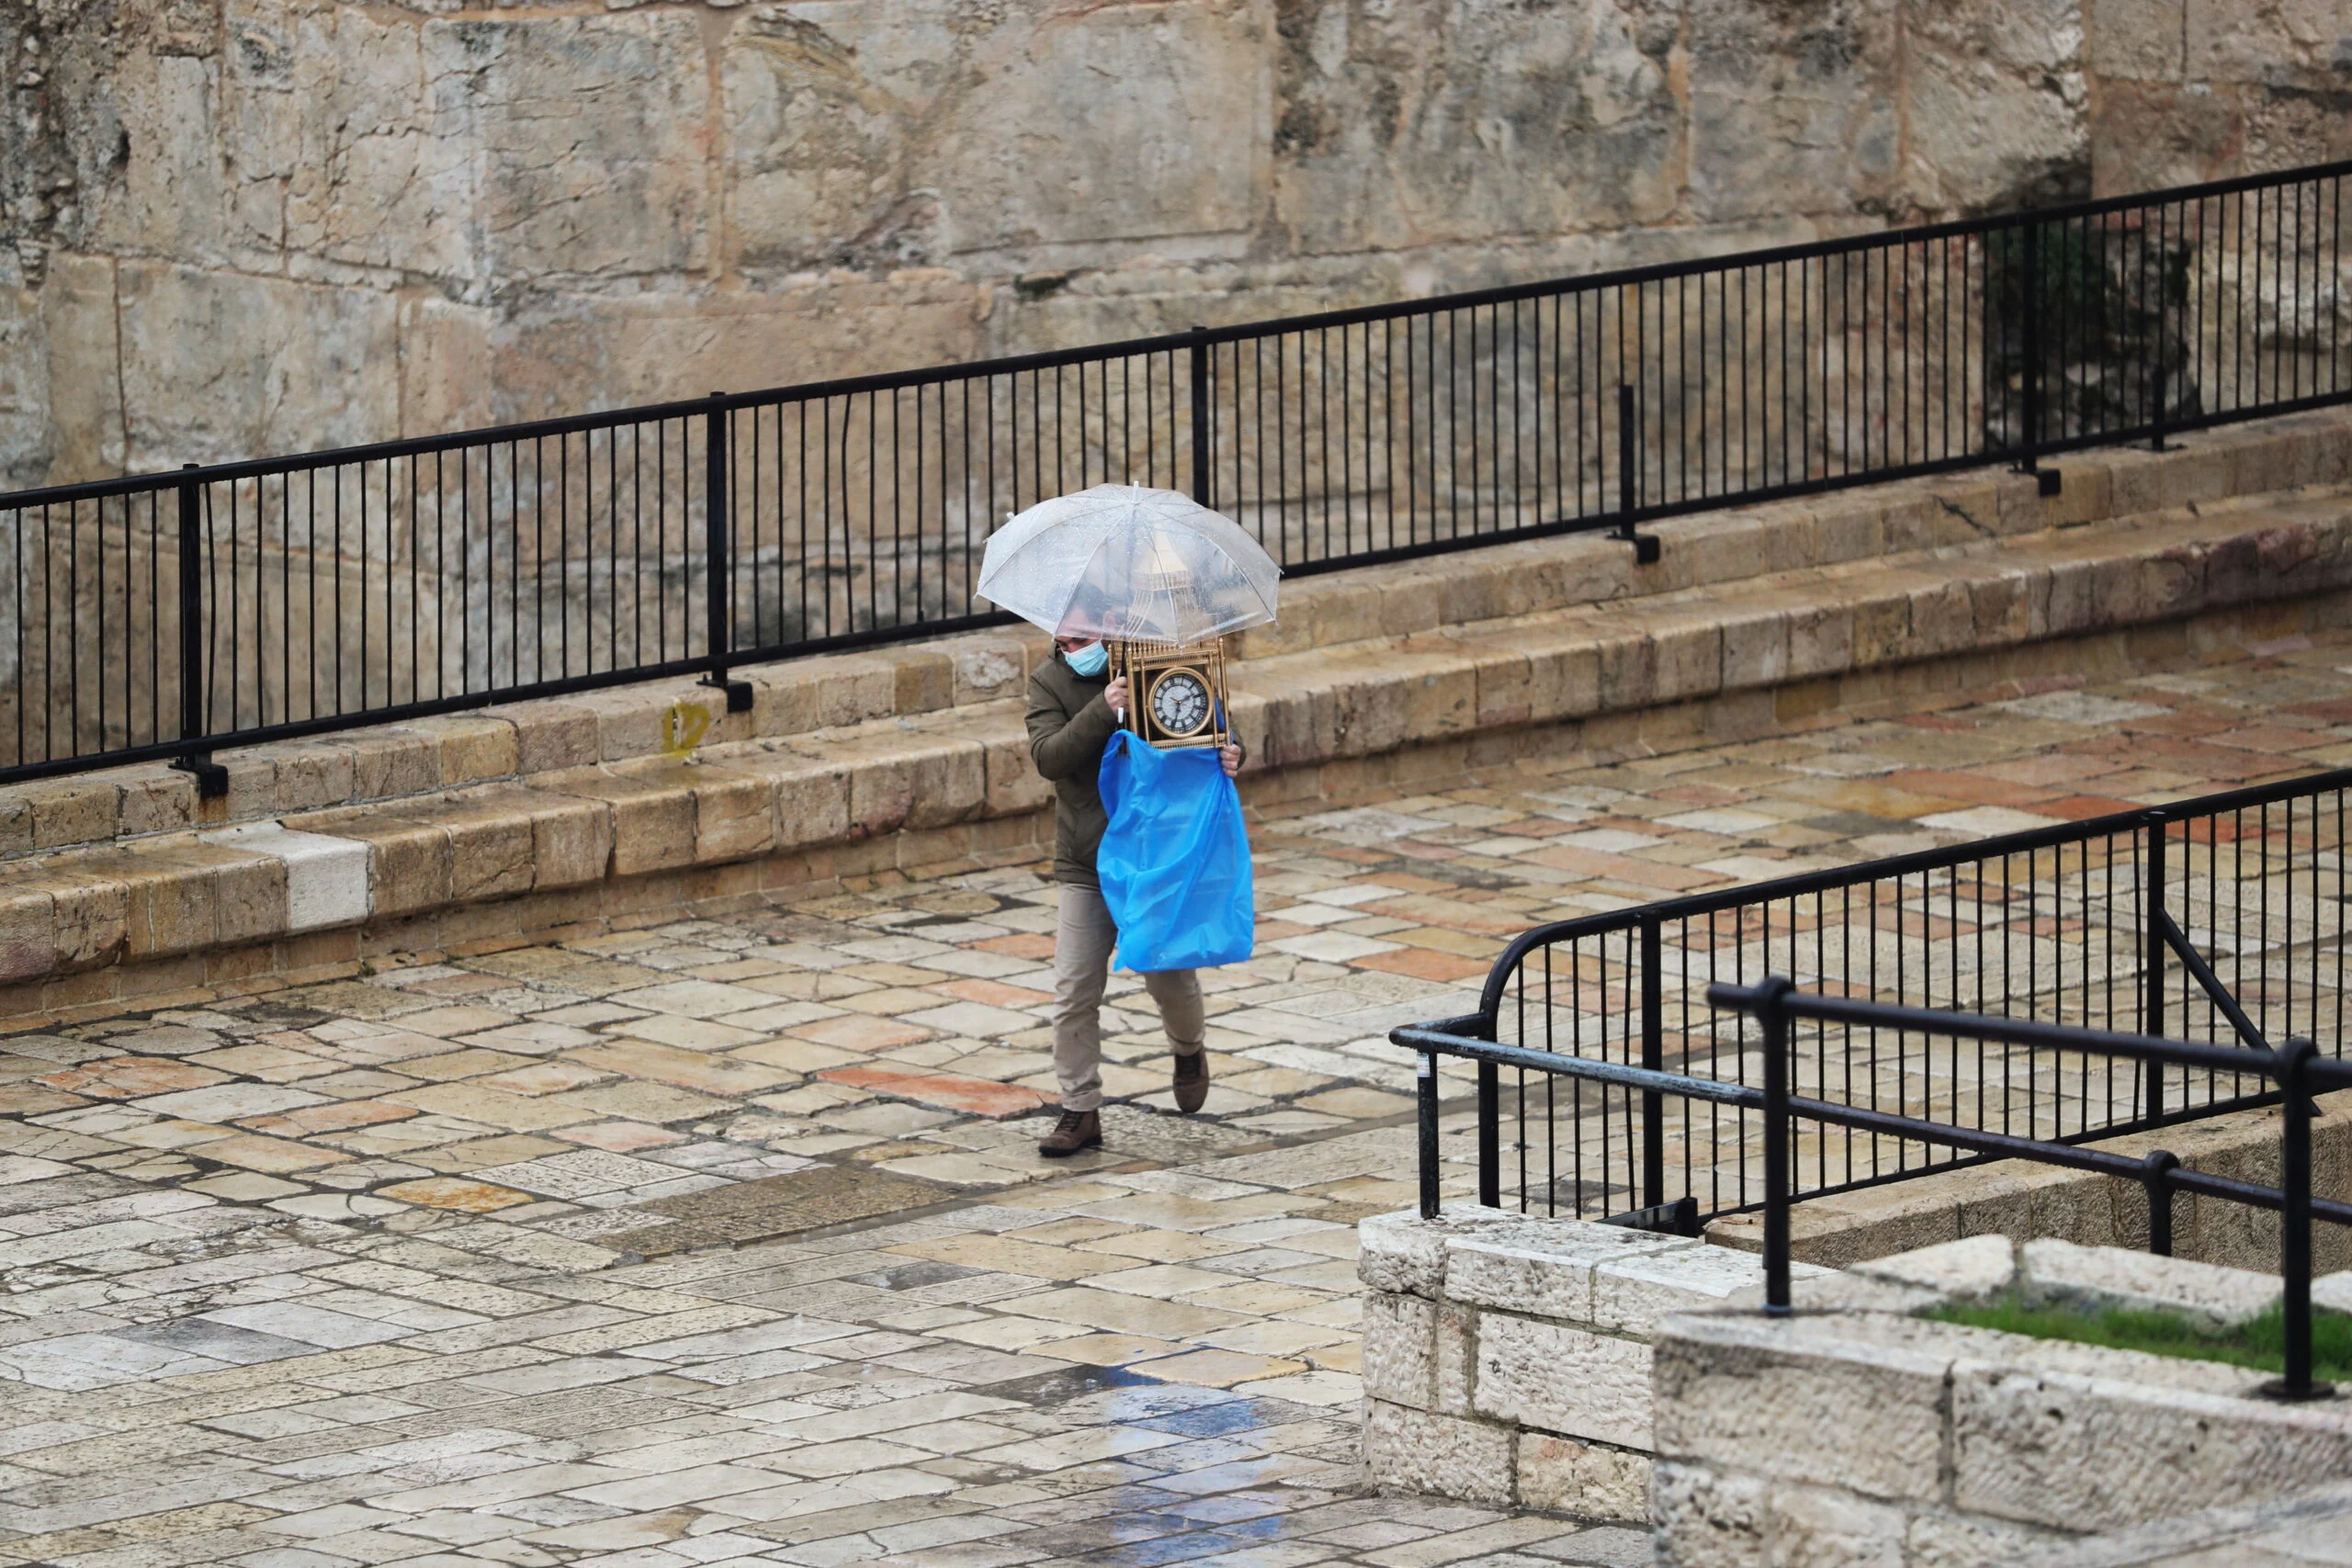 A Man Uses An Umbrella As He Carries A Clock While It Rains, Near Damascus Gate Just Outside Jerusalem's Old City